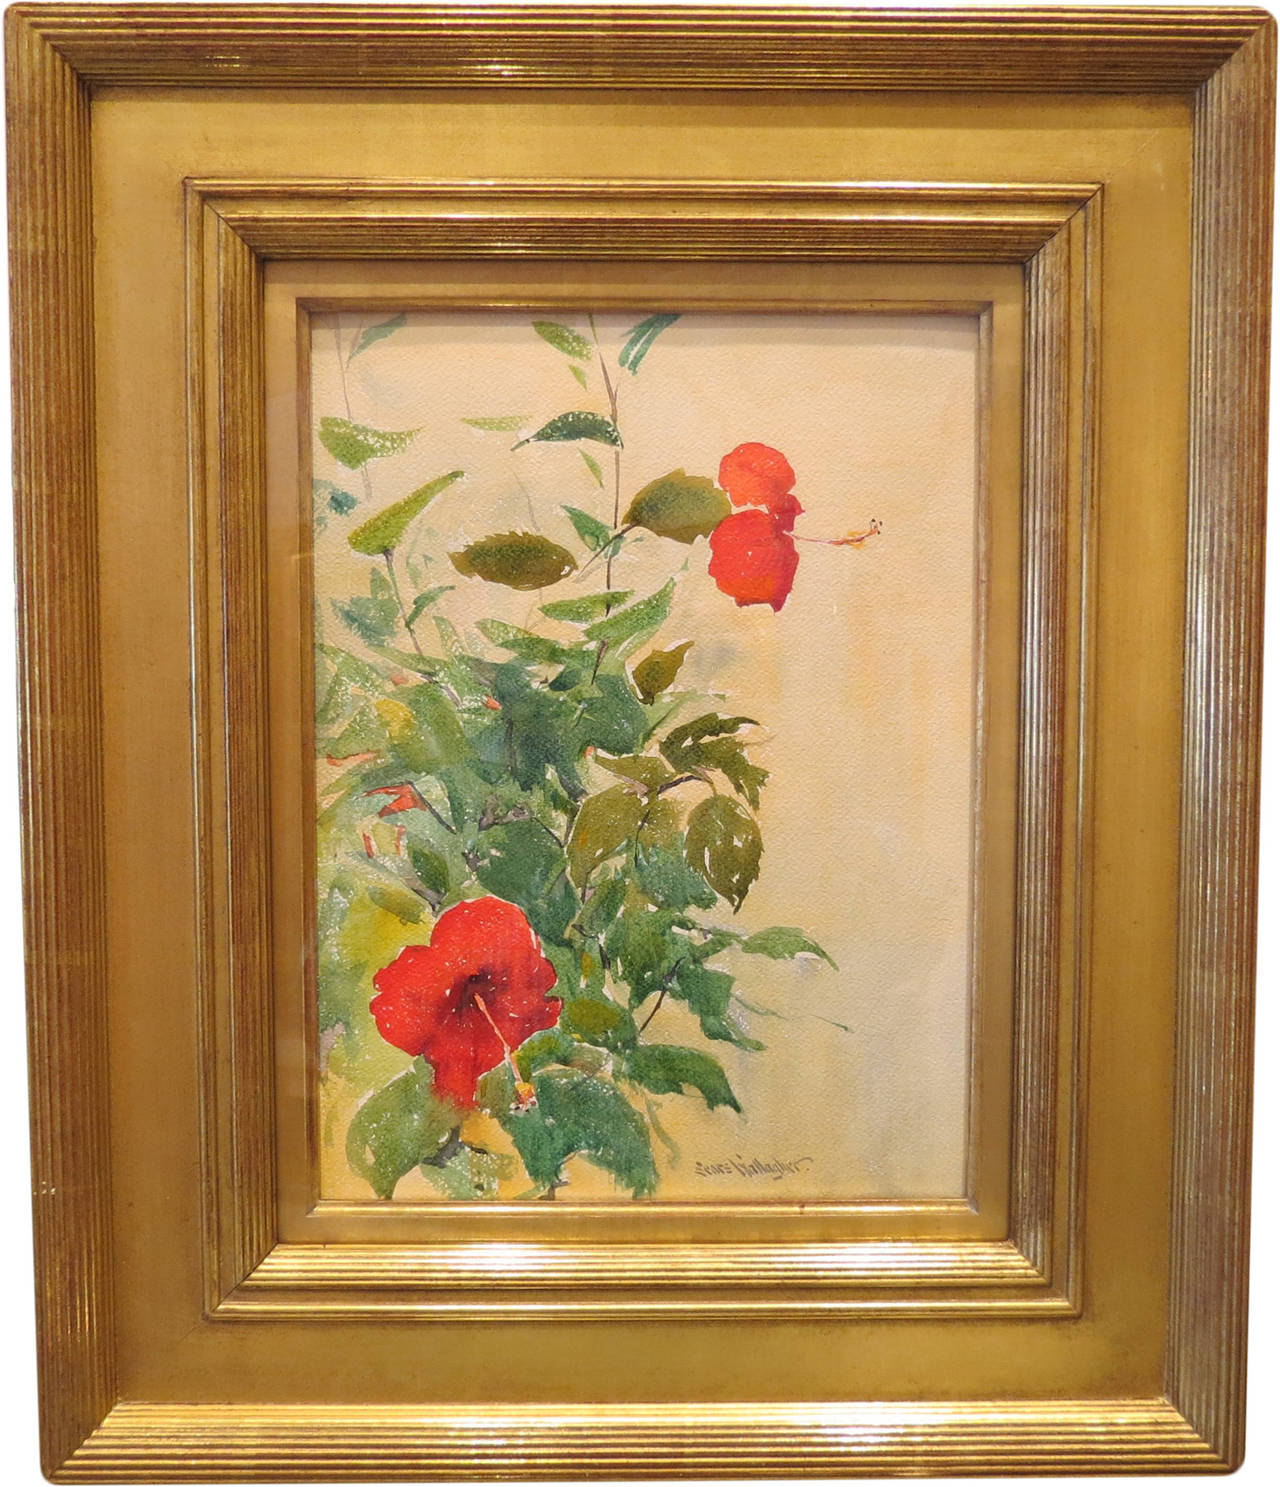 Sears Gallagher Still-Life - "Hibiscus"